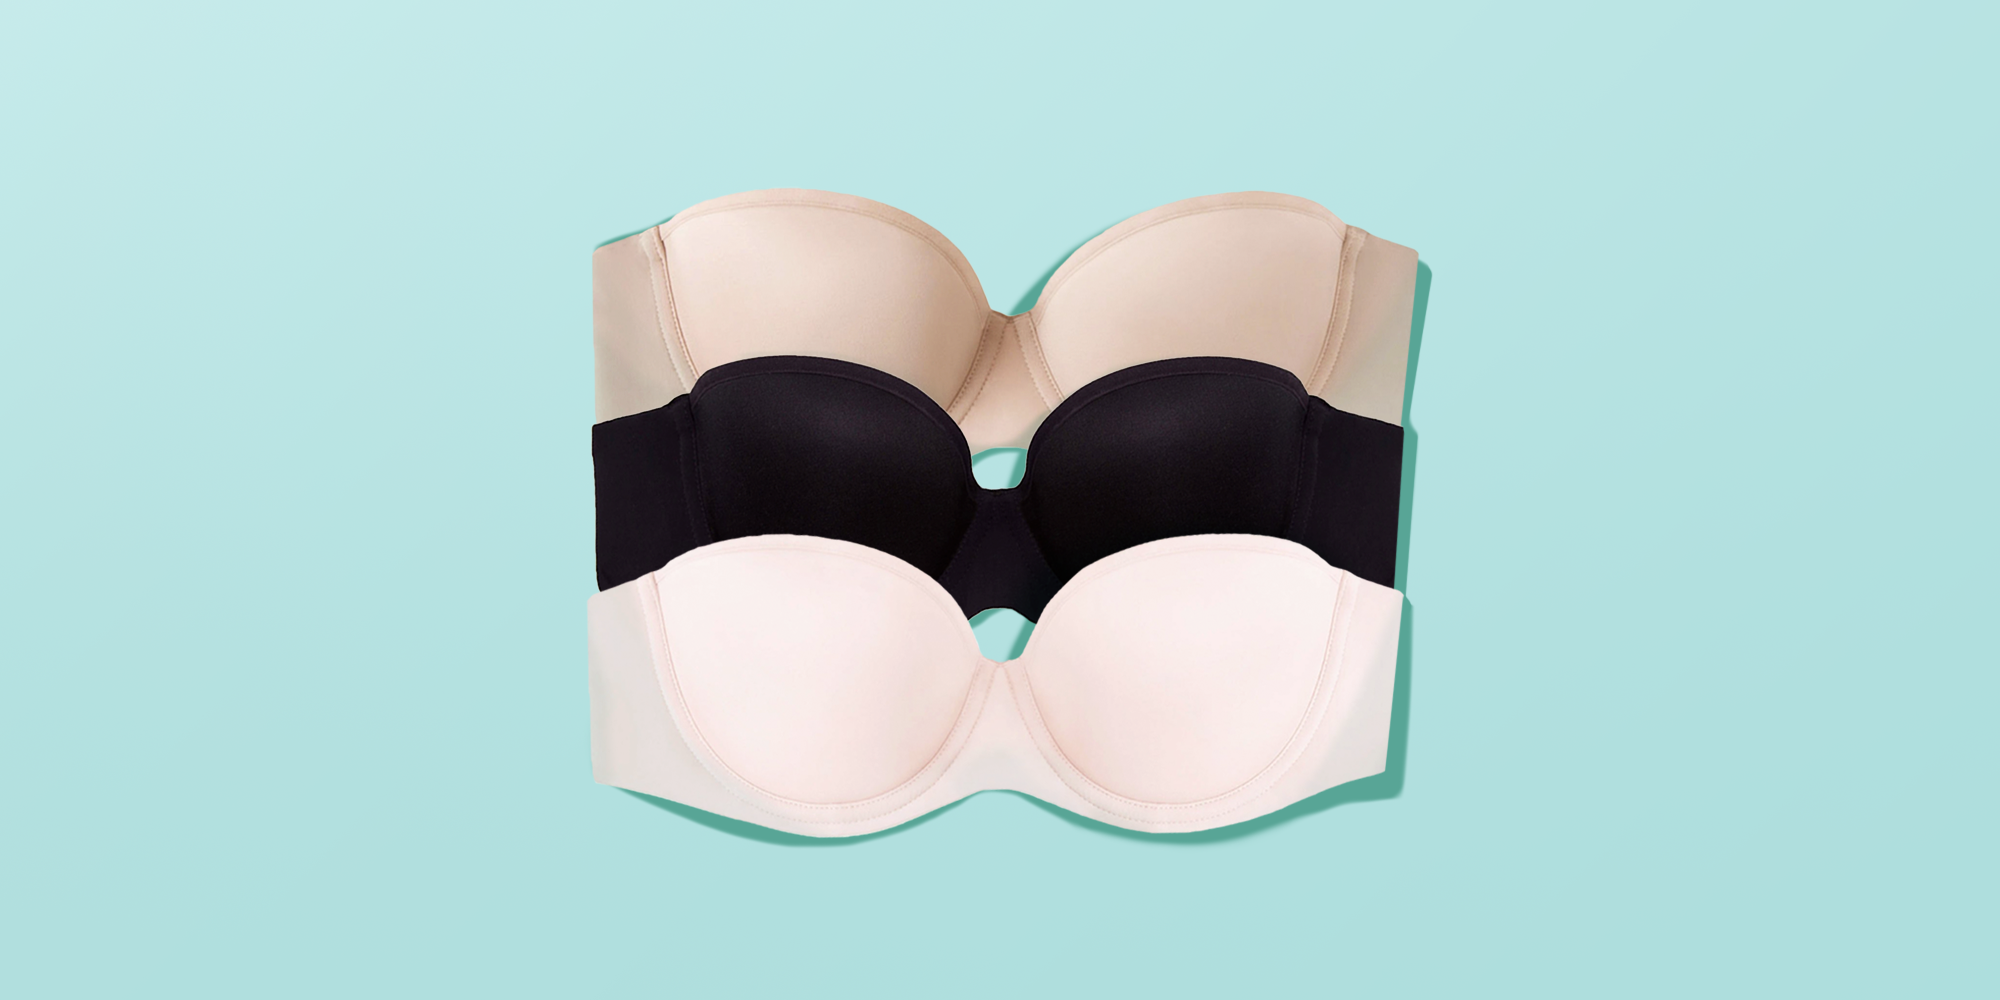 Strapless Bra Review, These strapless bras are AMAZING and stay in place  so well! Plus, they are comfortable! They are padded, but no underwire.  True to size. Right now, they